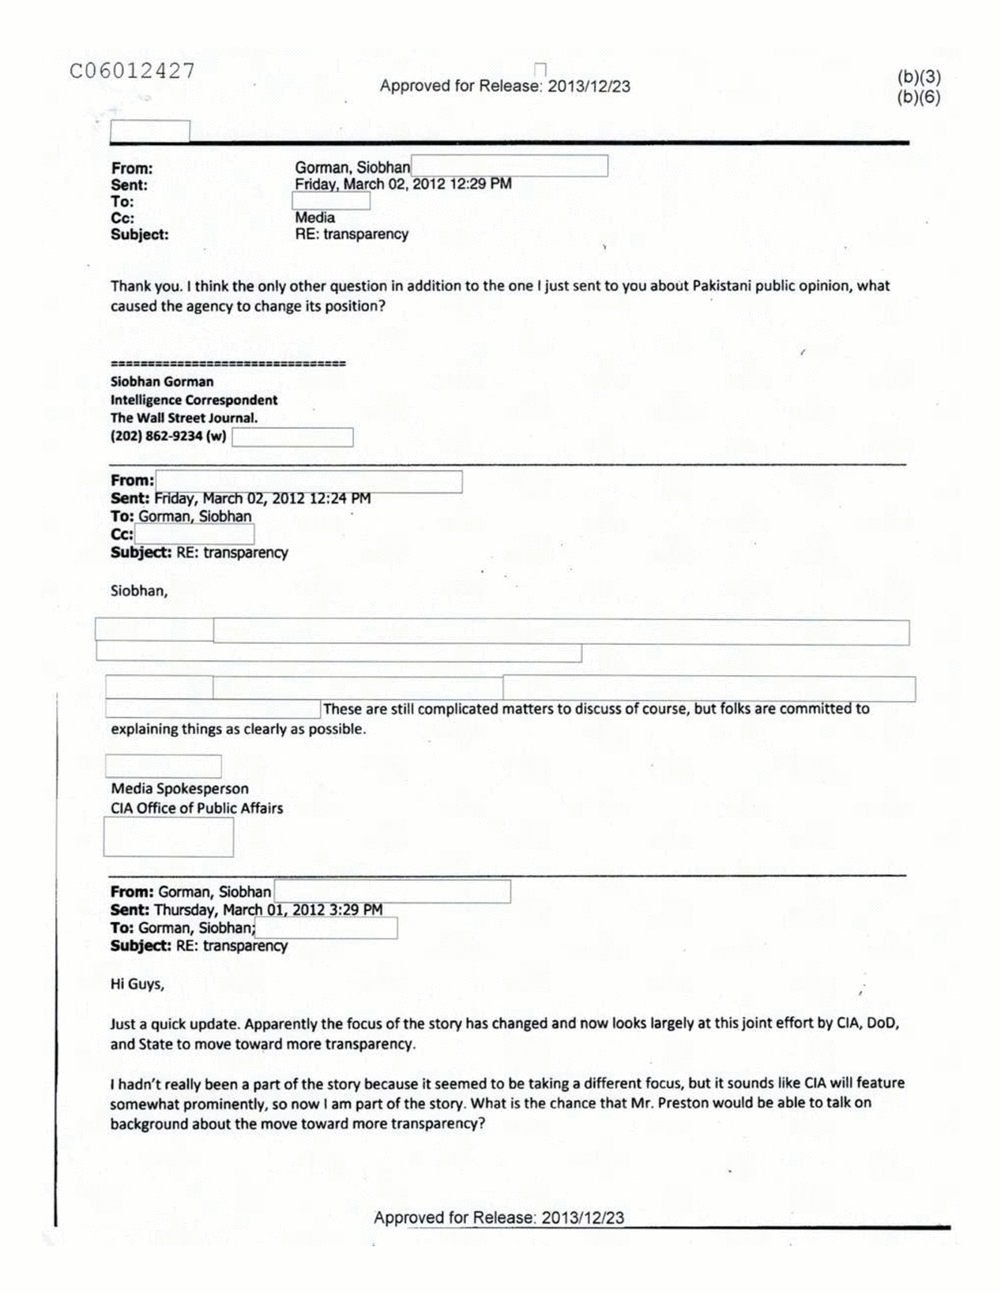 Page 1 from Email Correspondence Between Reporters and CIA Flacks